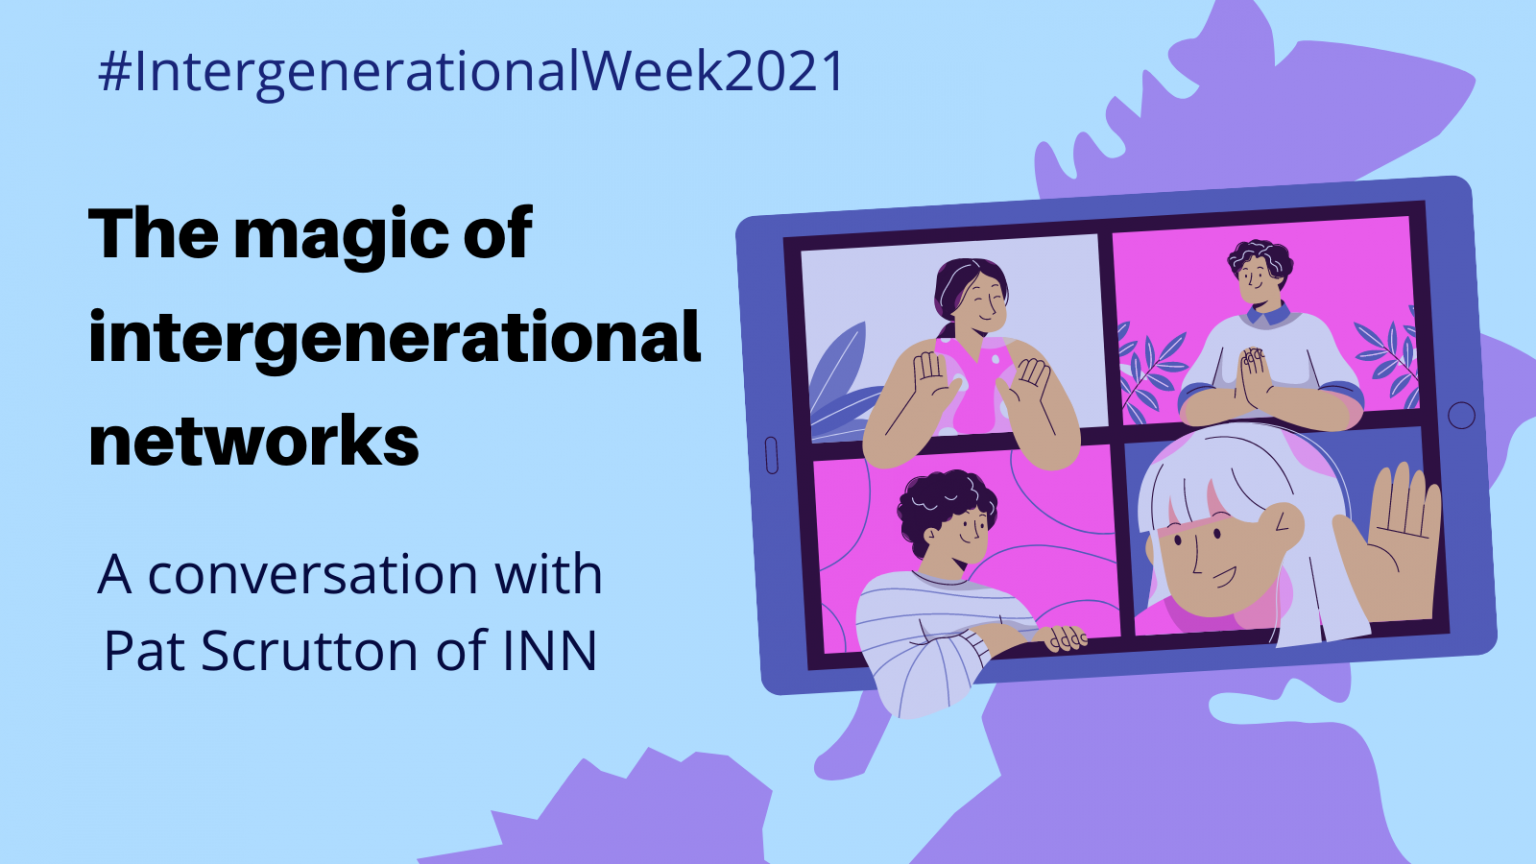 The magic of intergenerational networks. A conversation with the founder of NN